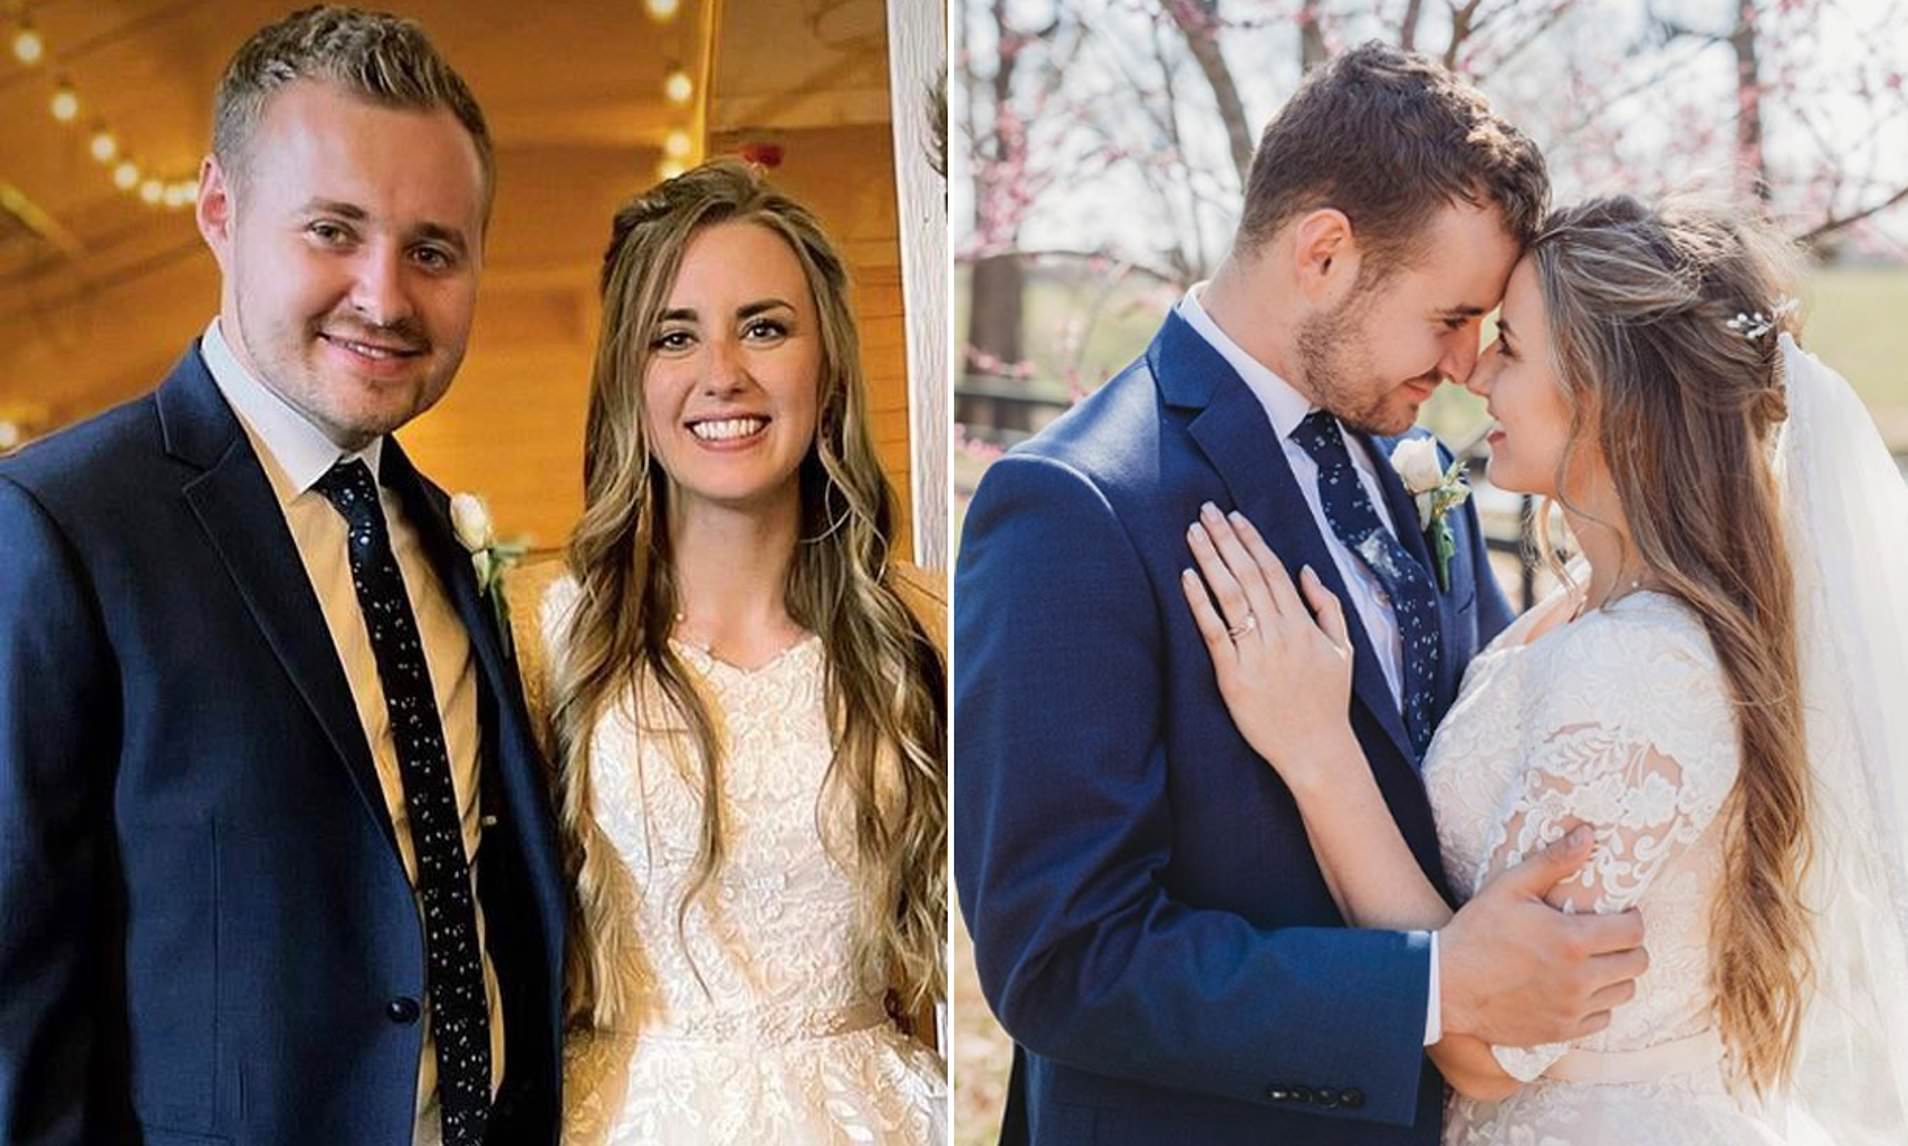 Jed Duggar And Katey Nakatsu The Duggar Couple Pregnant After 4 Months of Wedding!